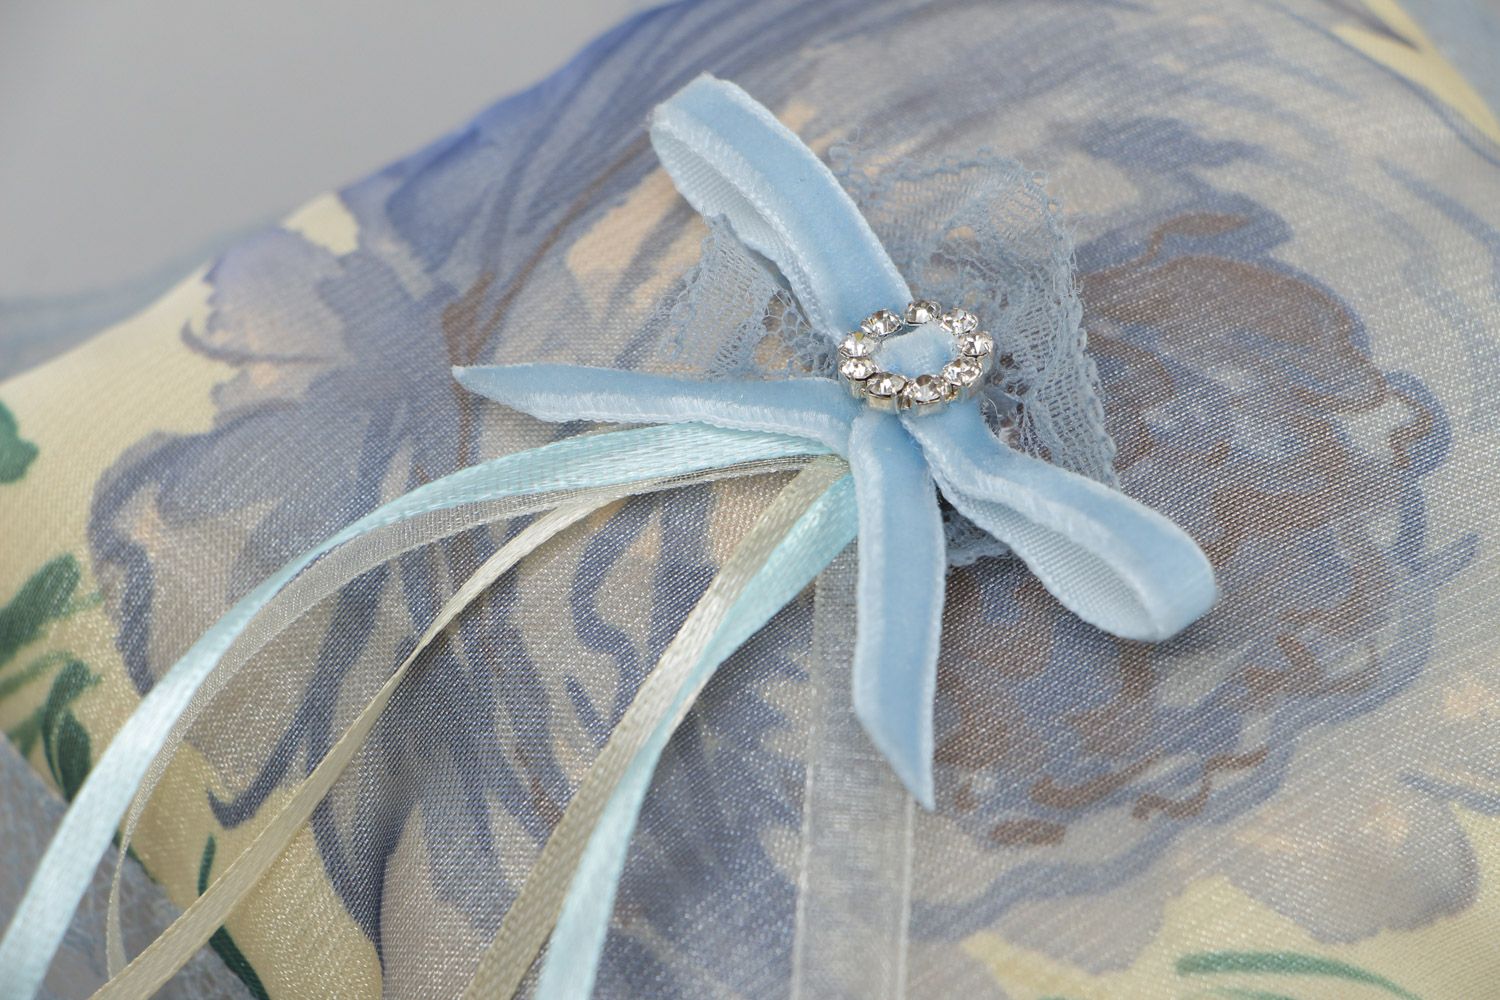 Handmade wedding ring pillow with lace and flower print photo 4